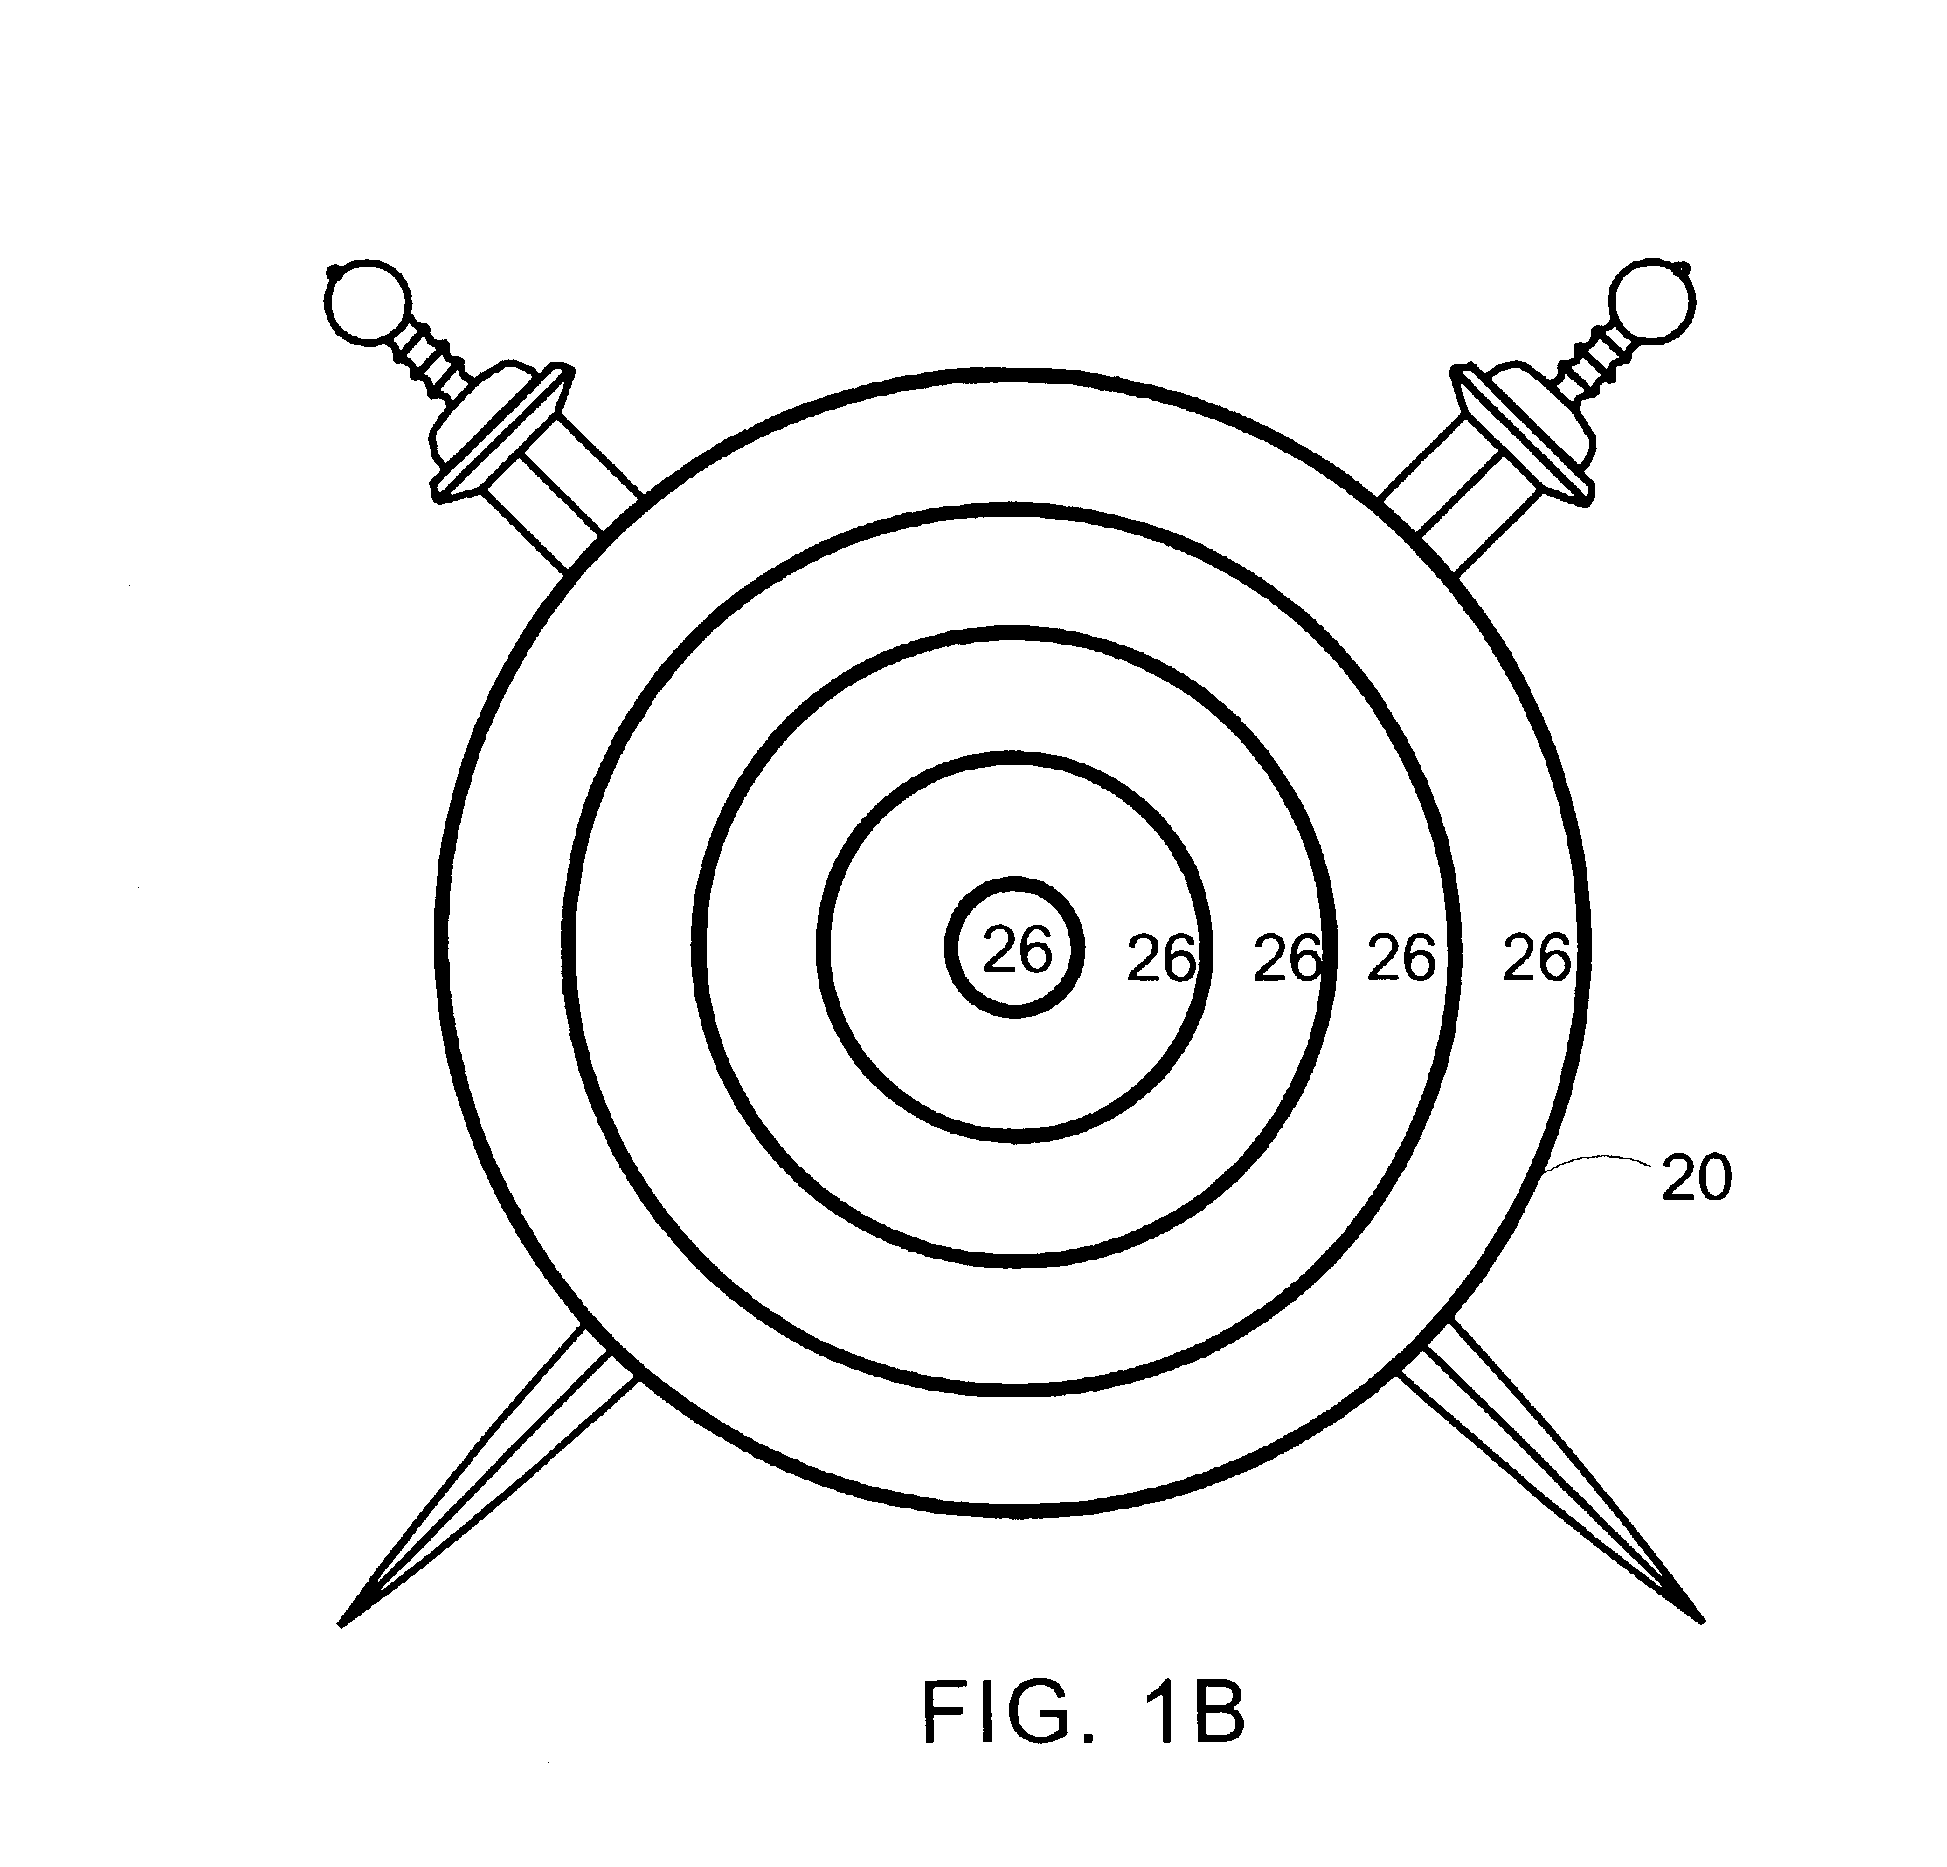 Method and apparatus for a learning system